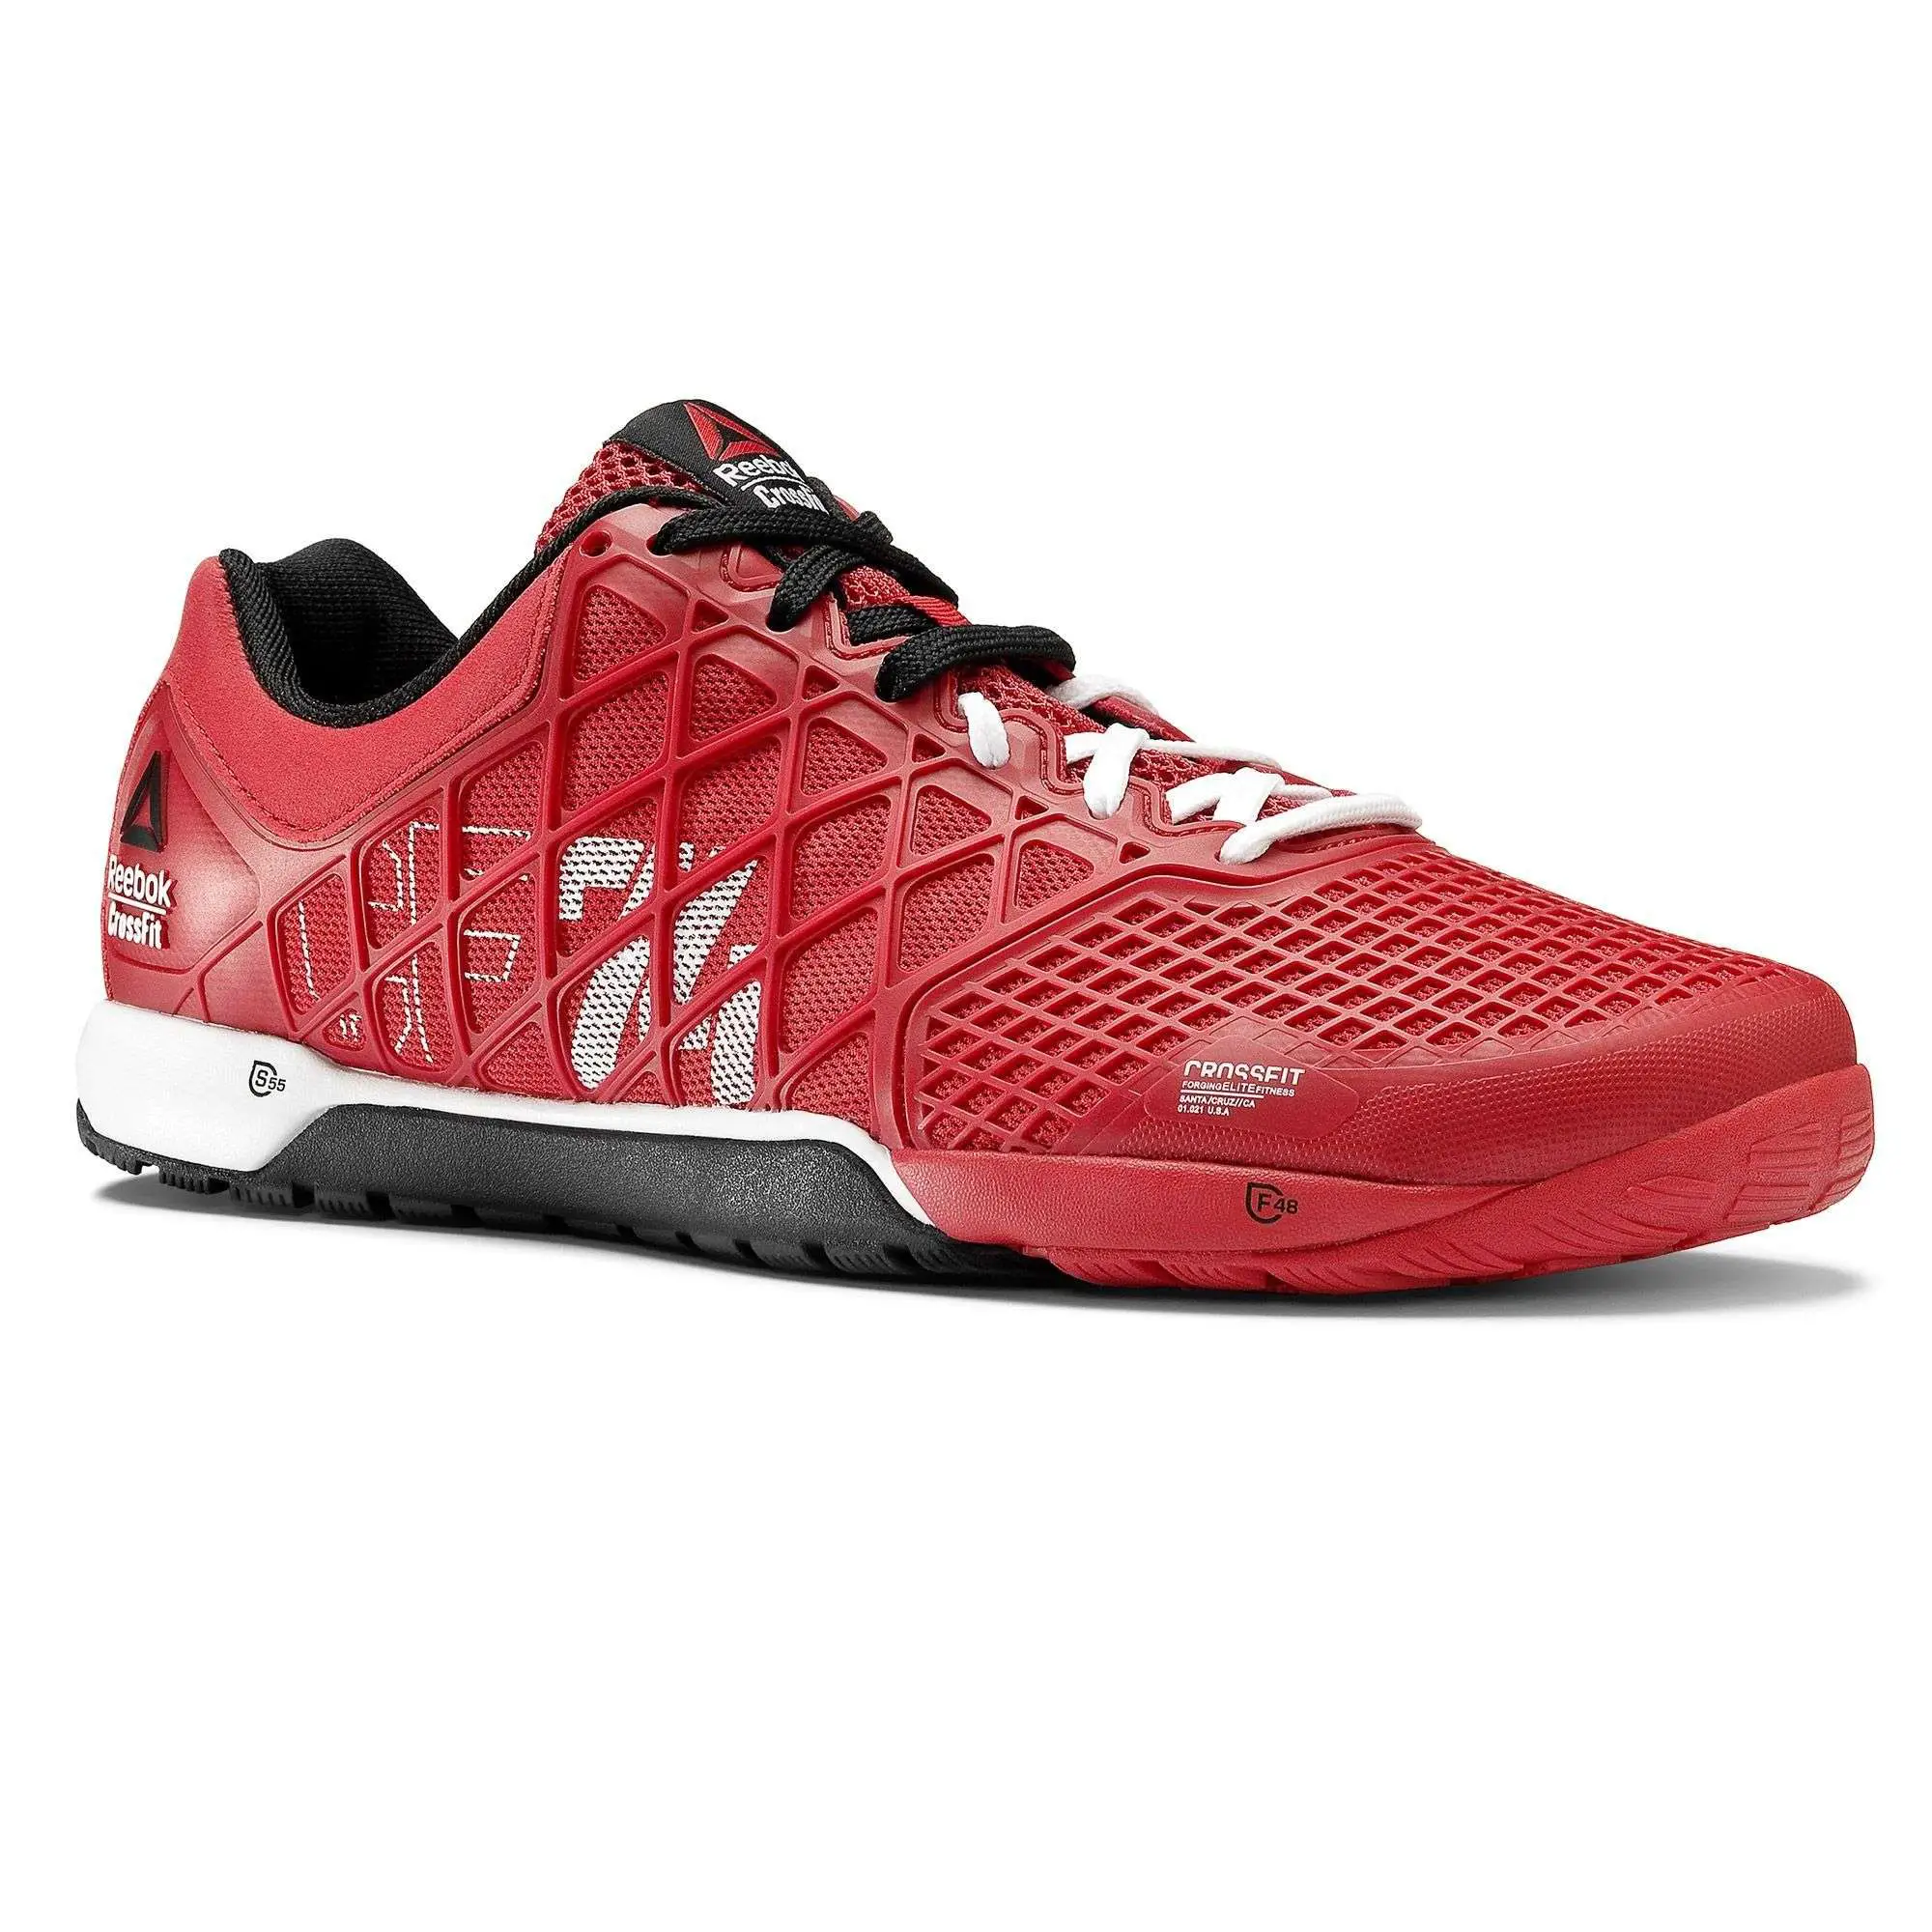 Budget Crossfit Shoes. Best Crossfit Shoes in January for ...